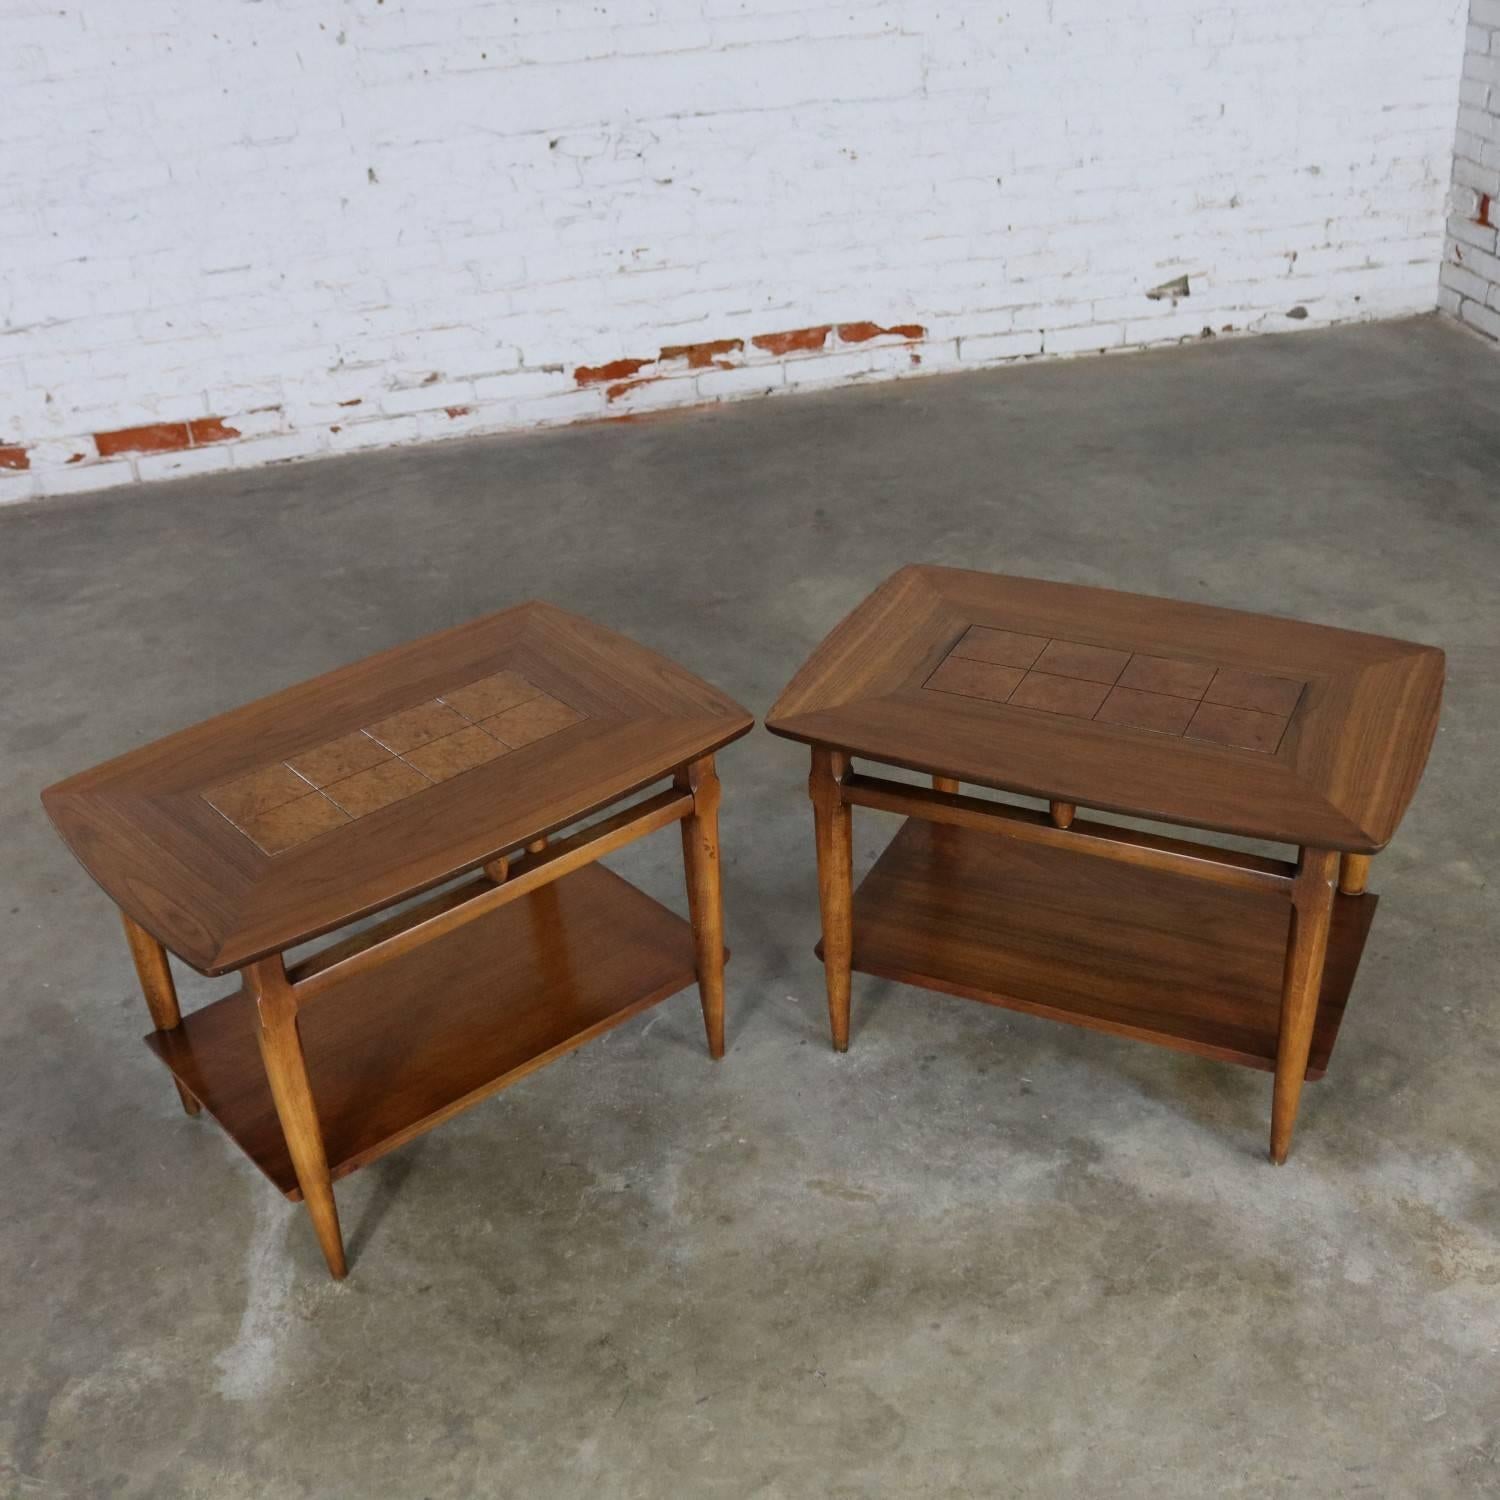 Beautiful pair of inlaid walnut Mid-Century Modern side or end tables style #1925 by Lane. They are in wonderful restored condition. The burled inlays are slightly different in color which is inherent of the burl. Dated November 15, 1958.

Lane